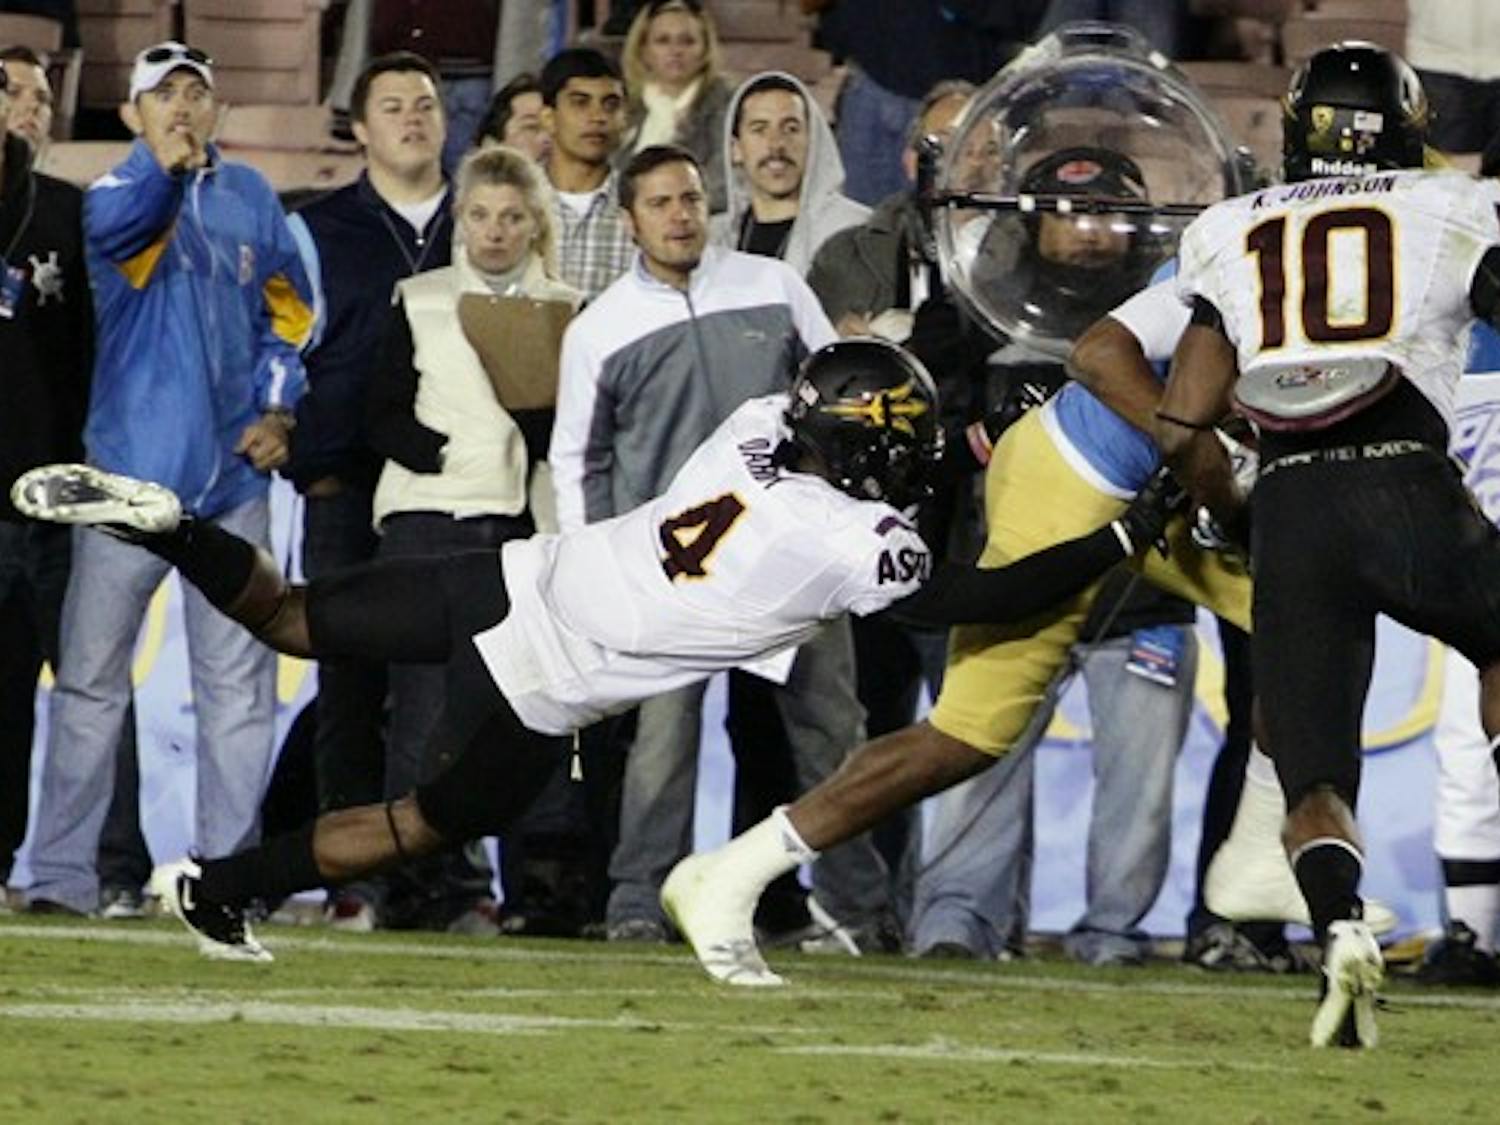 AIR ATTACK: ASU sophomore Alden Darby (4) dives to make a tackle while junior safety Keelan Johnson arrives in support during the Sun Devils’ 29-28 loss to UCLA. The Sun Devil defense gave up an uncharacteristic 503 yards passing during Saturday’s loss to Washington State. (Photo by Beth Easterbrook)